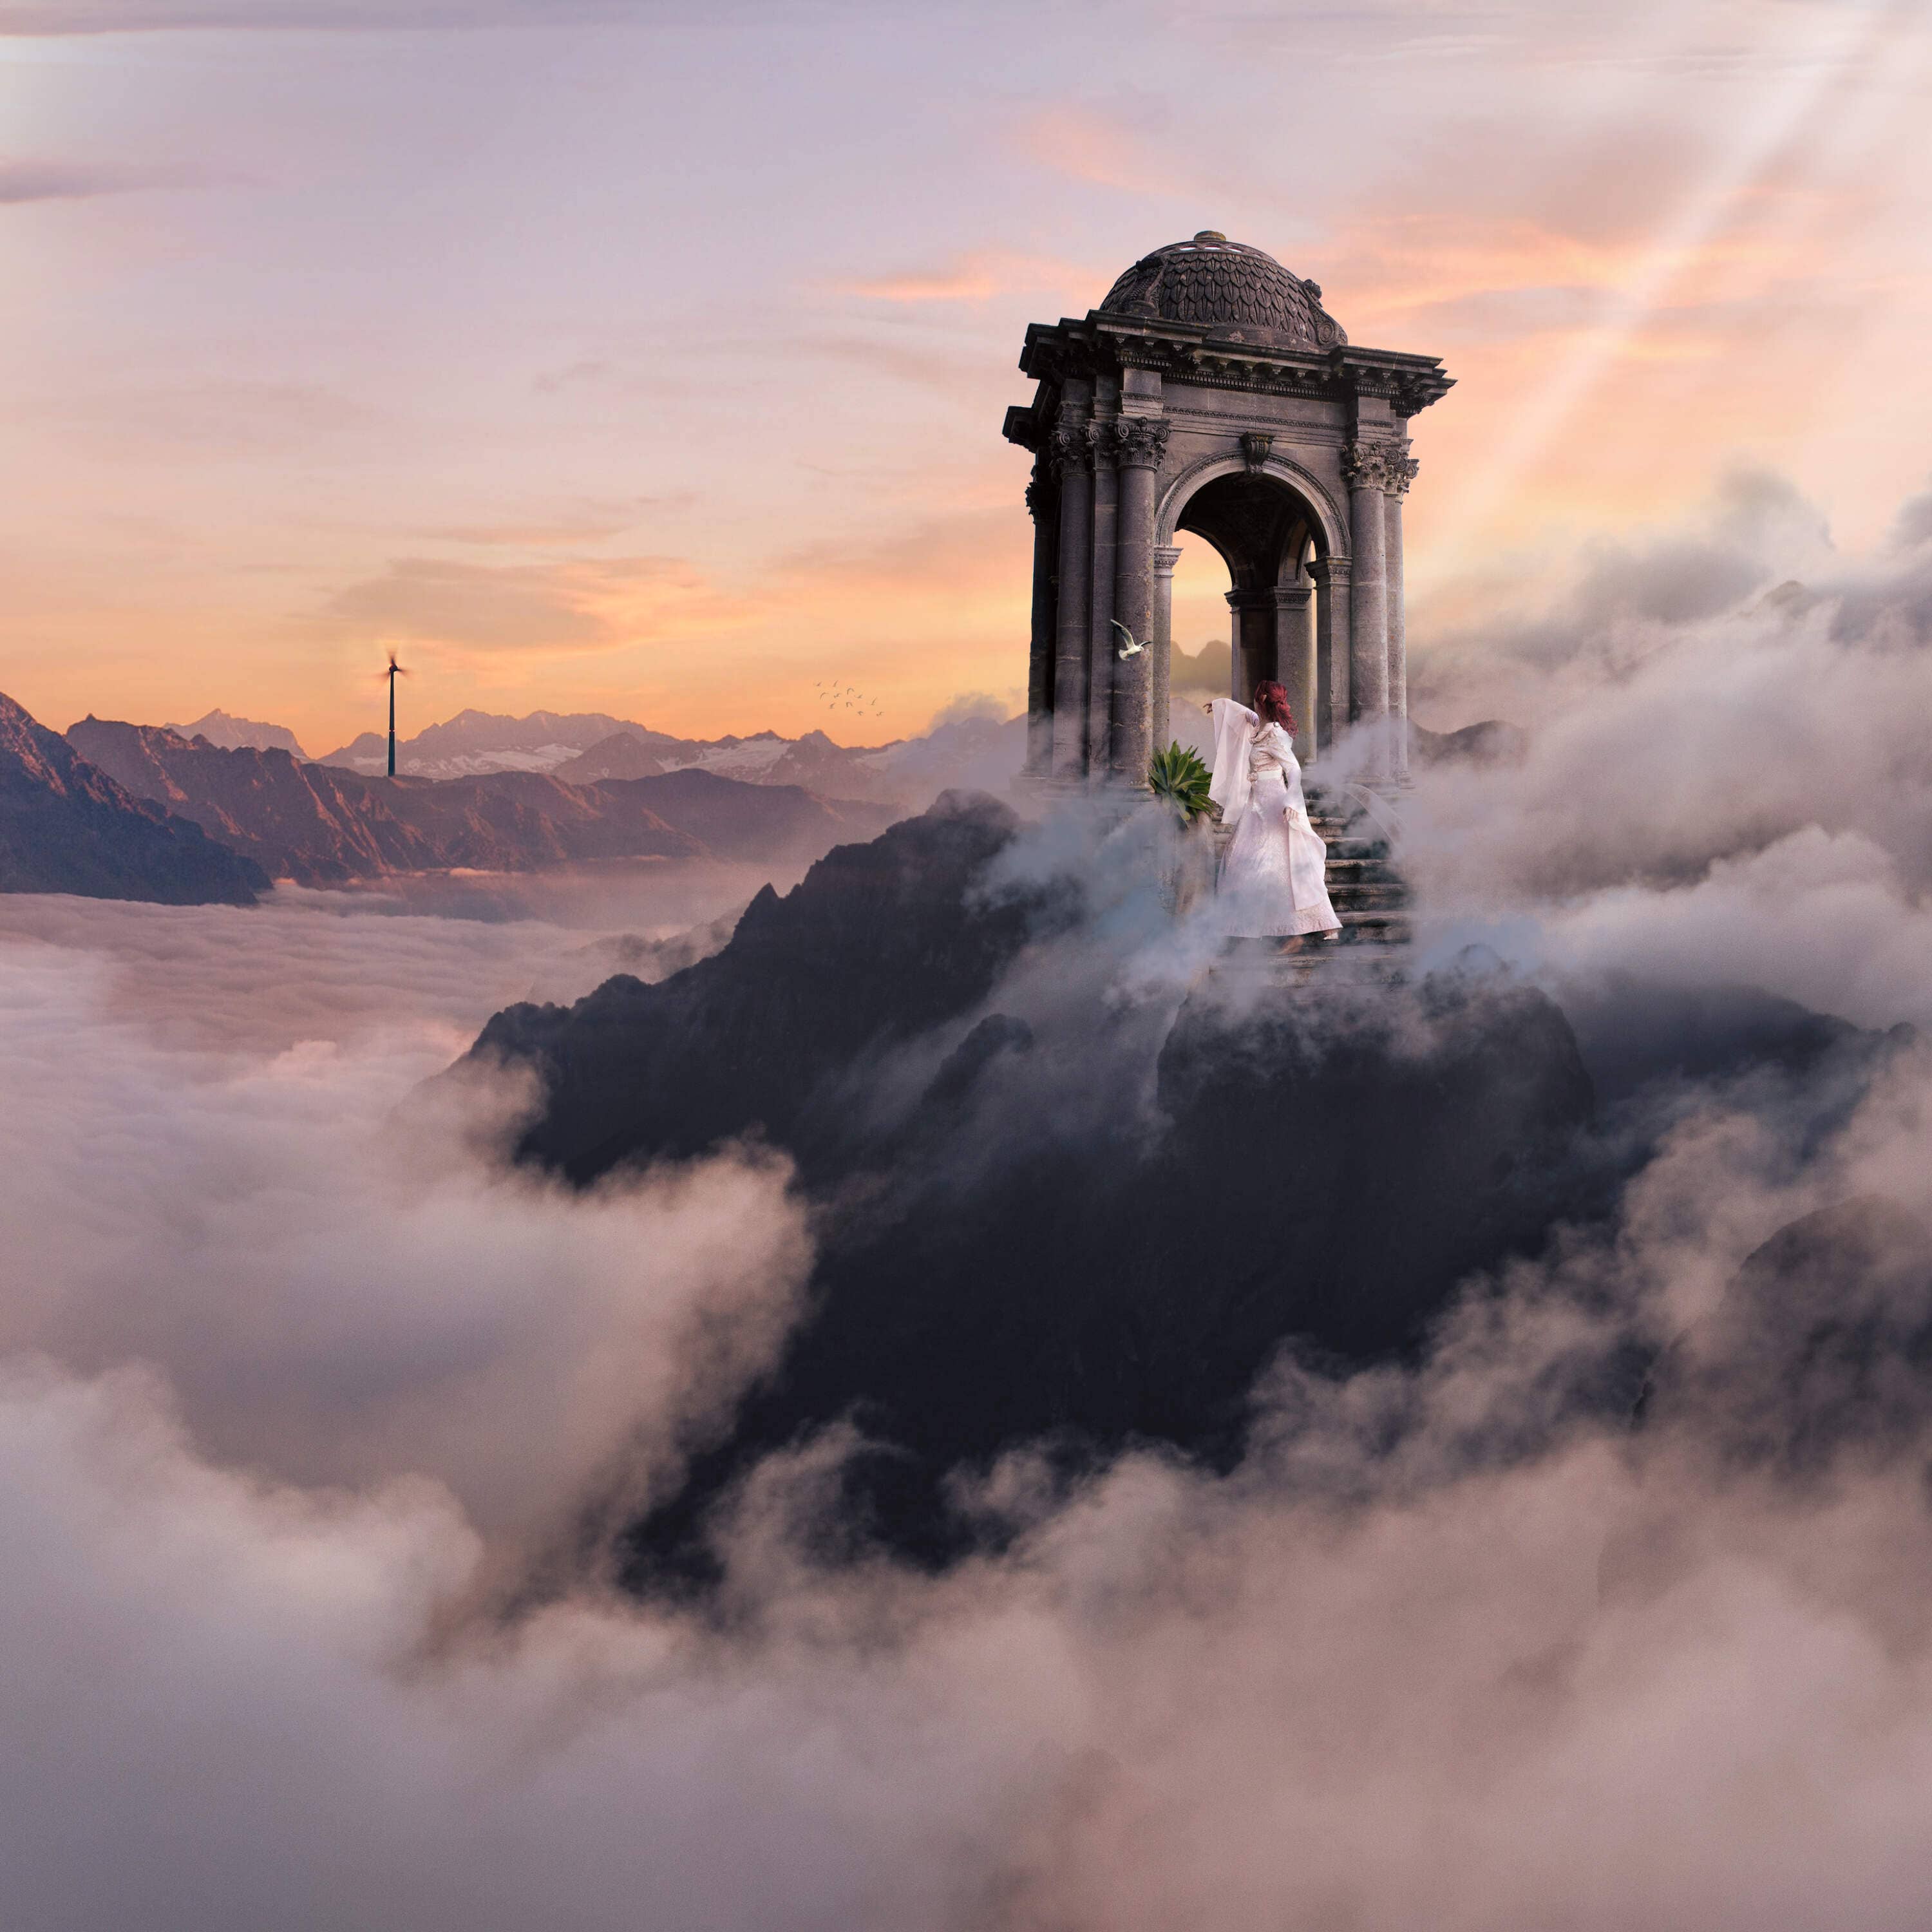 Create a Fantasy Place above the Clouds Photo Manipulation in Photoshop